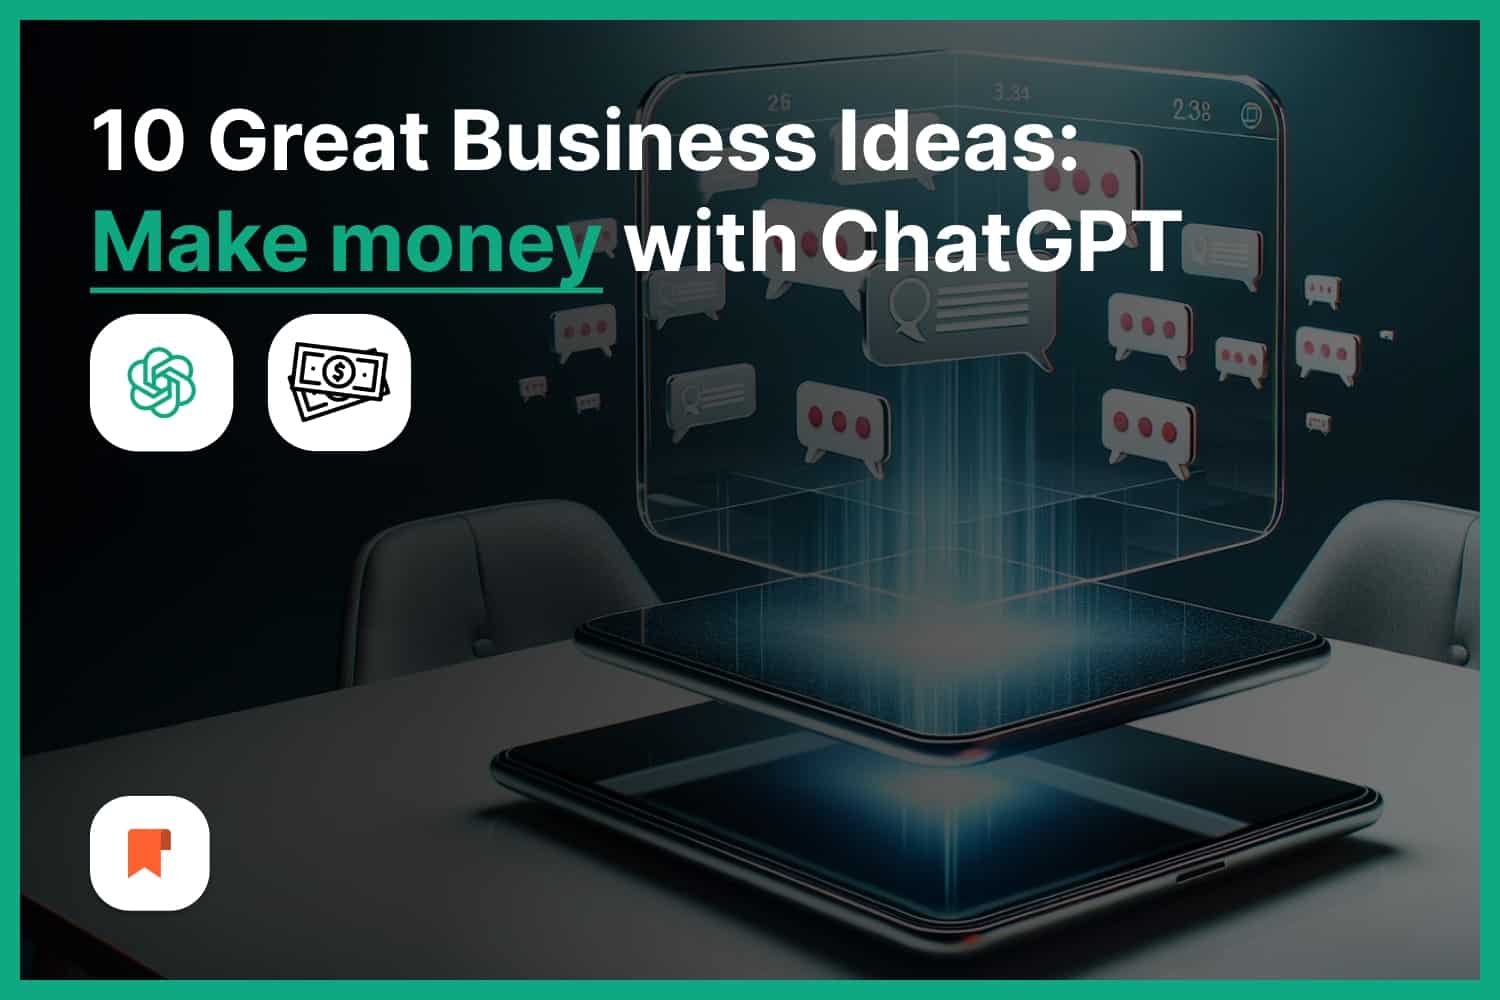 How to make money using ChatGPT